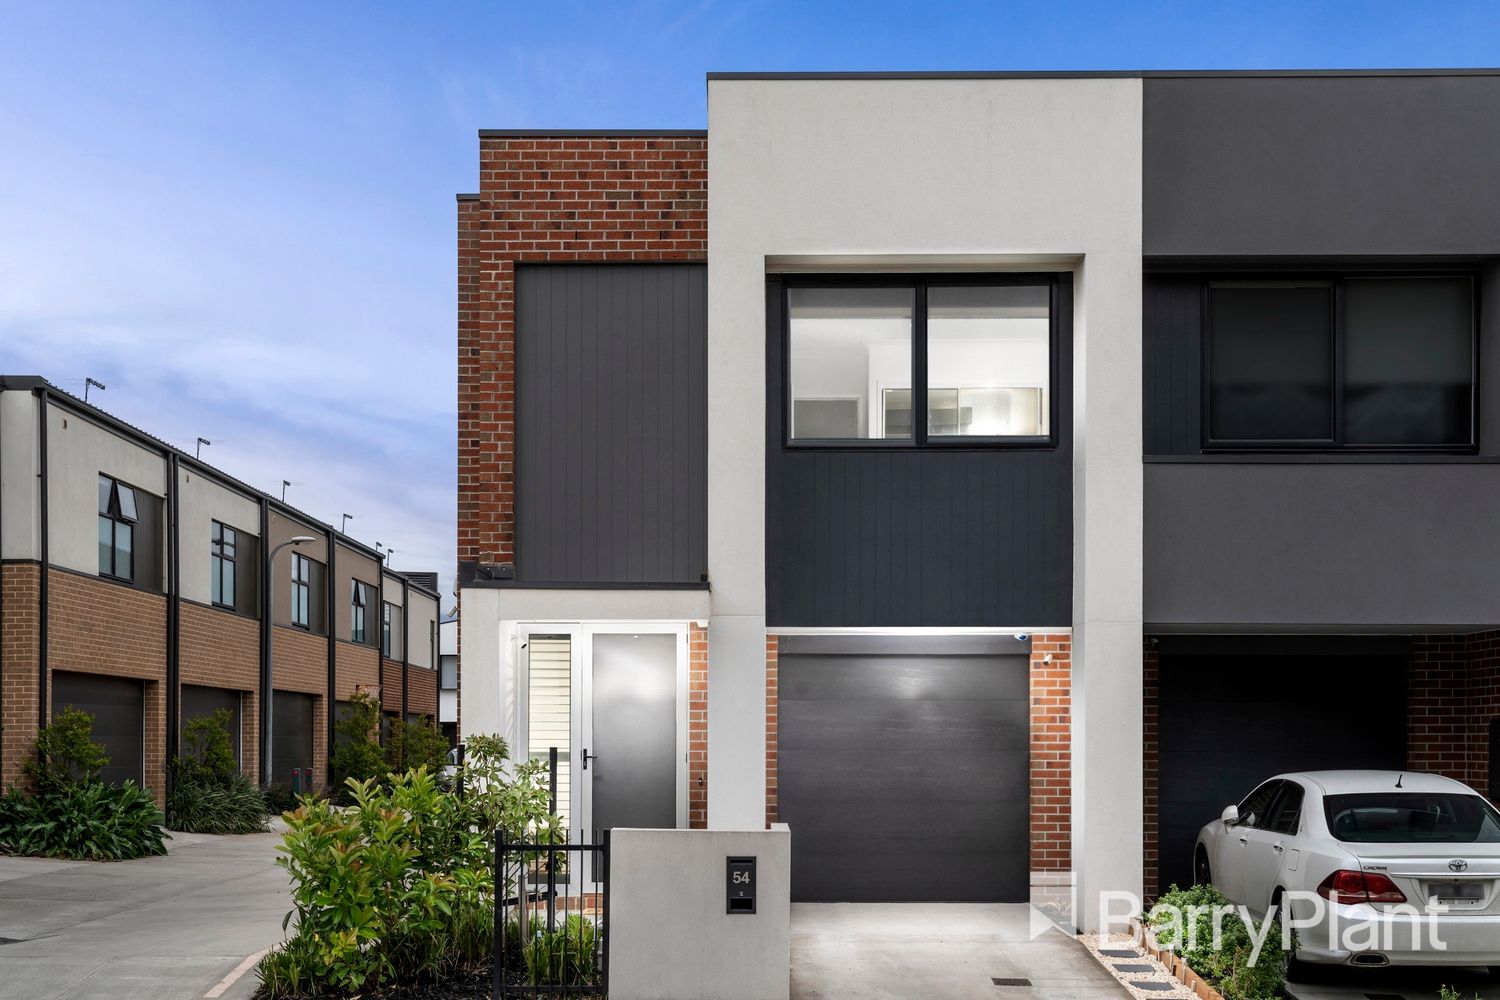 3 bedrooms Townhouse in 54 Teague Crescent BRAYBROOK VIC, 3019